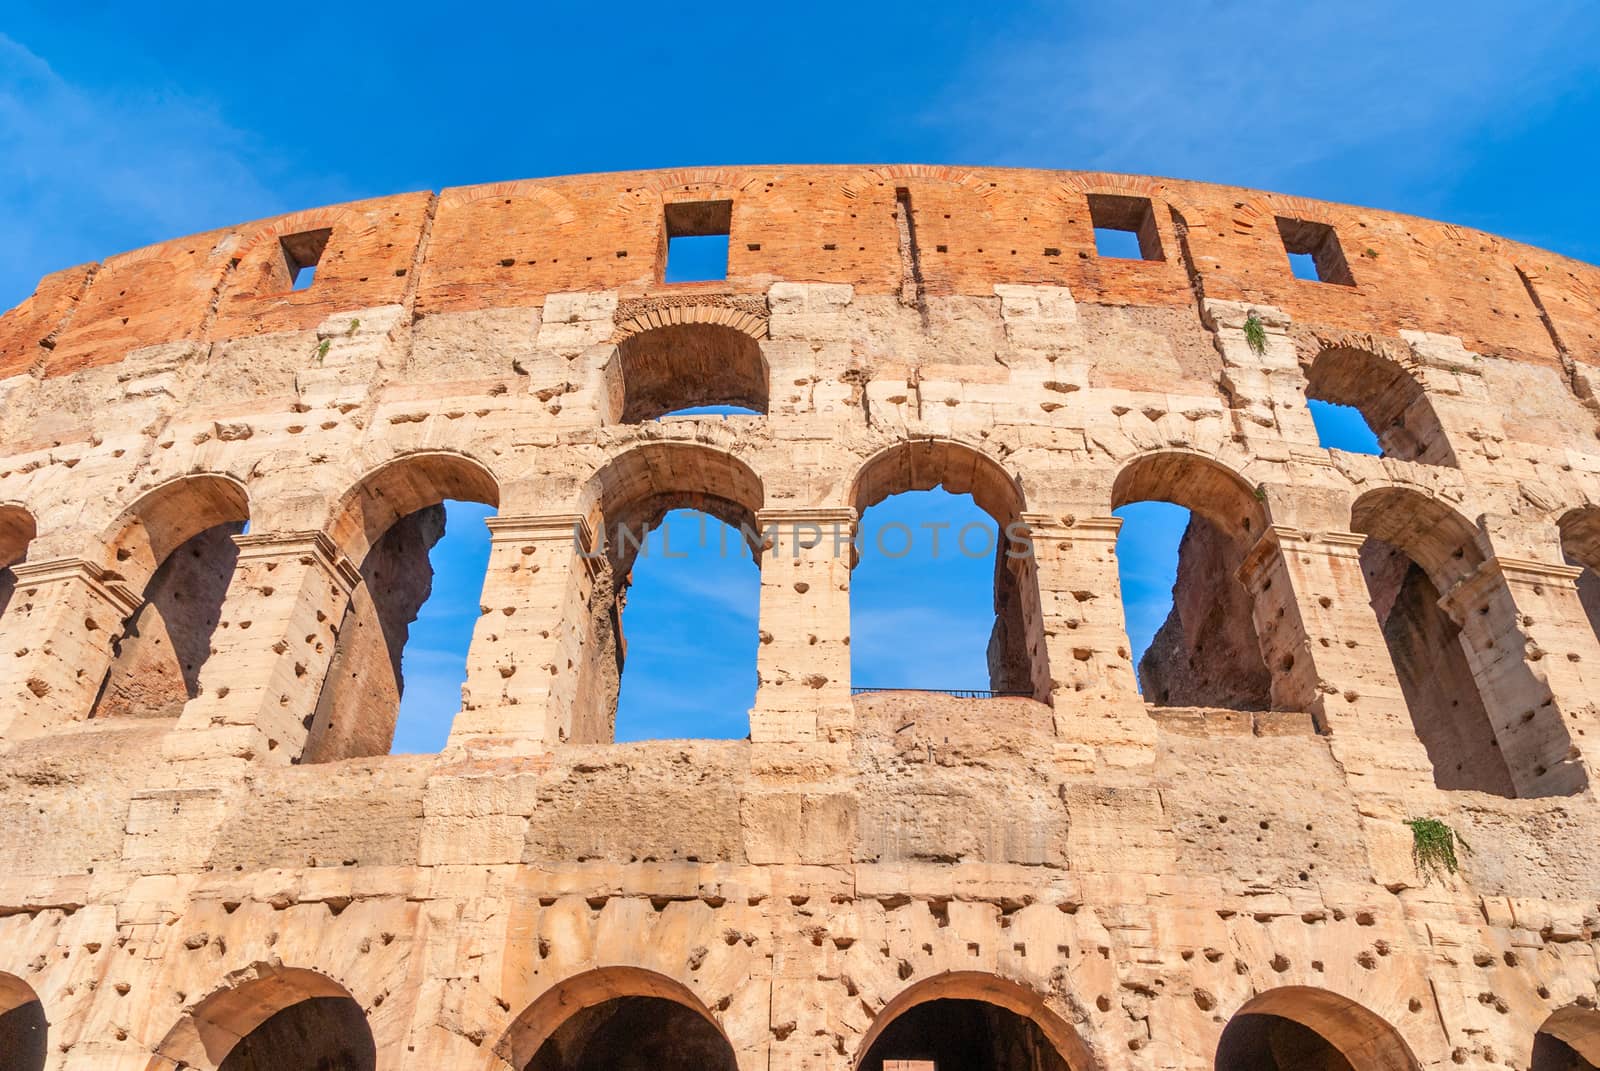 Colosseum in Rome, Italy. Ancient Roman Colosseum is one of the main tourist attractions in Europe. People visit the famous Colosseum in Roma center. Scenic nice view of Colosseum ruins in summer.